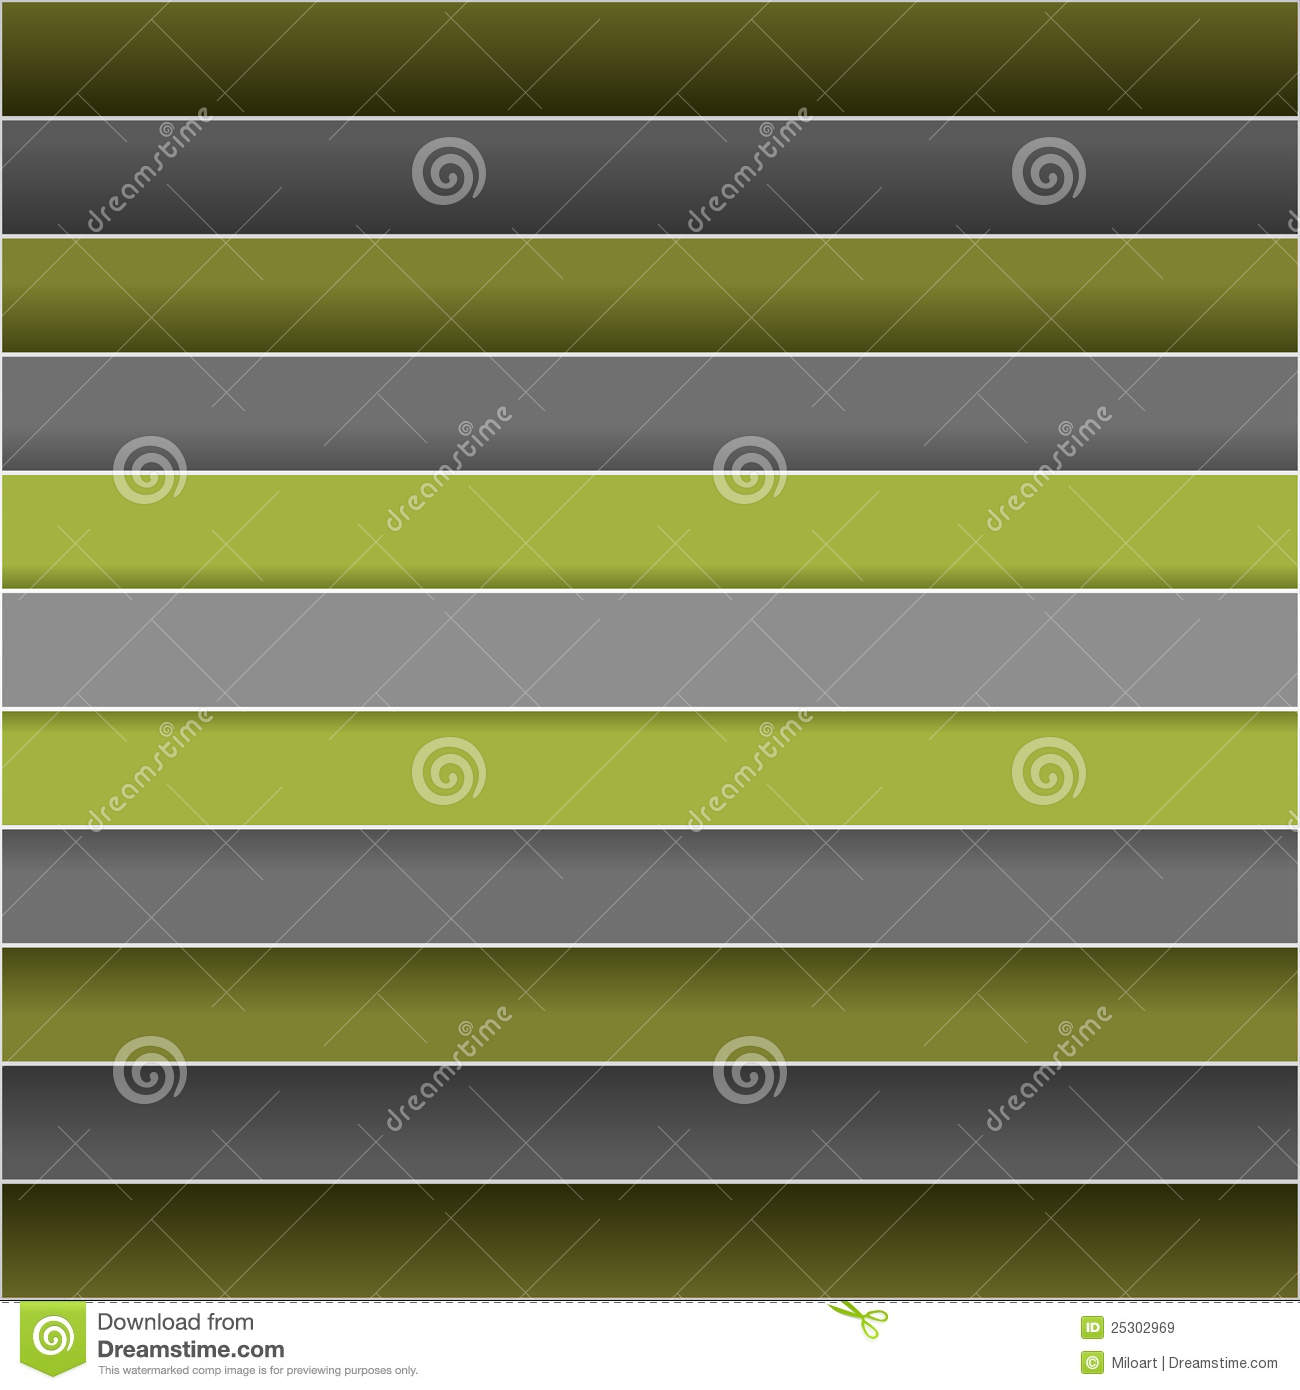 Horizontal Lines Pattern Background  Royalty Free Stock Images   Image    